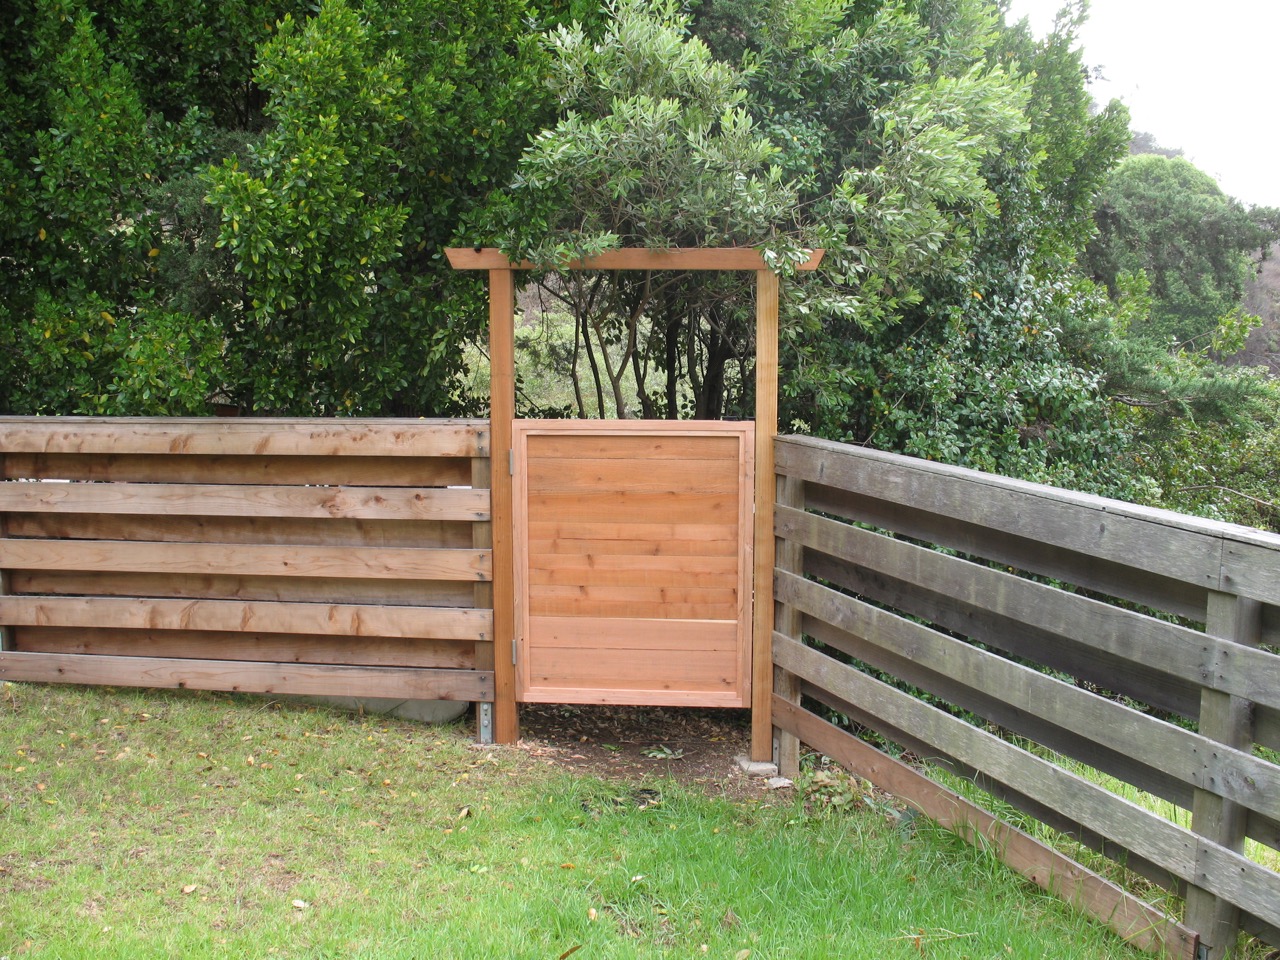 Simple gate installed in existing fence